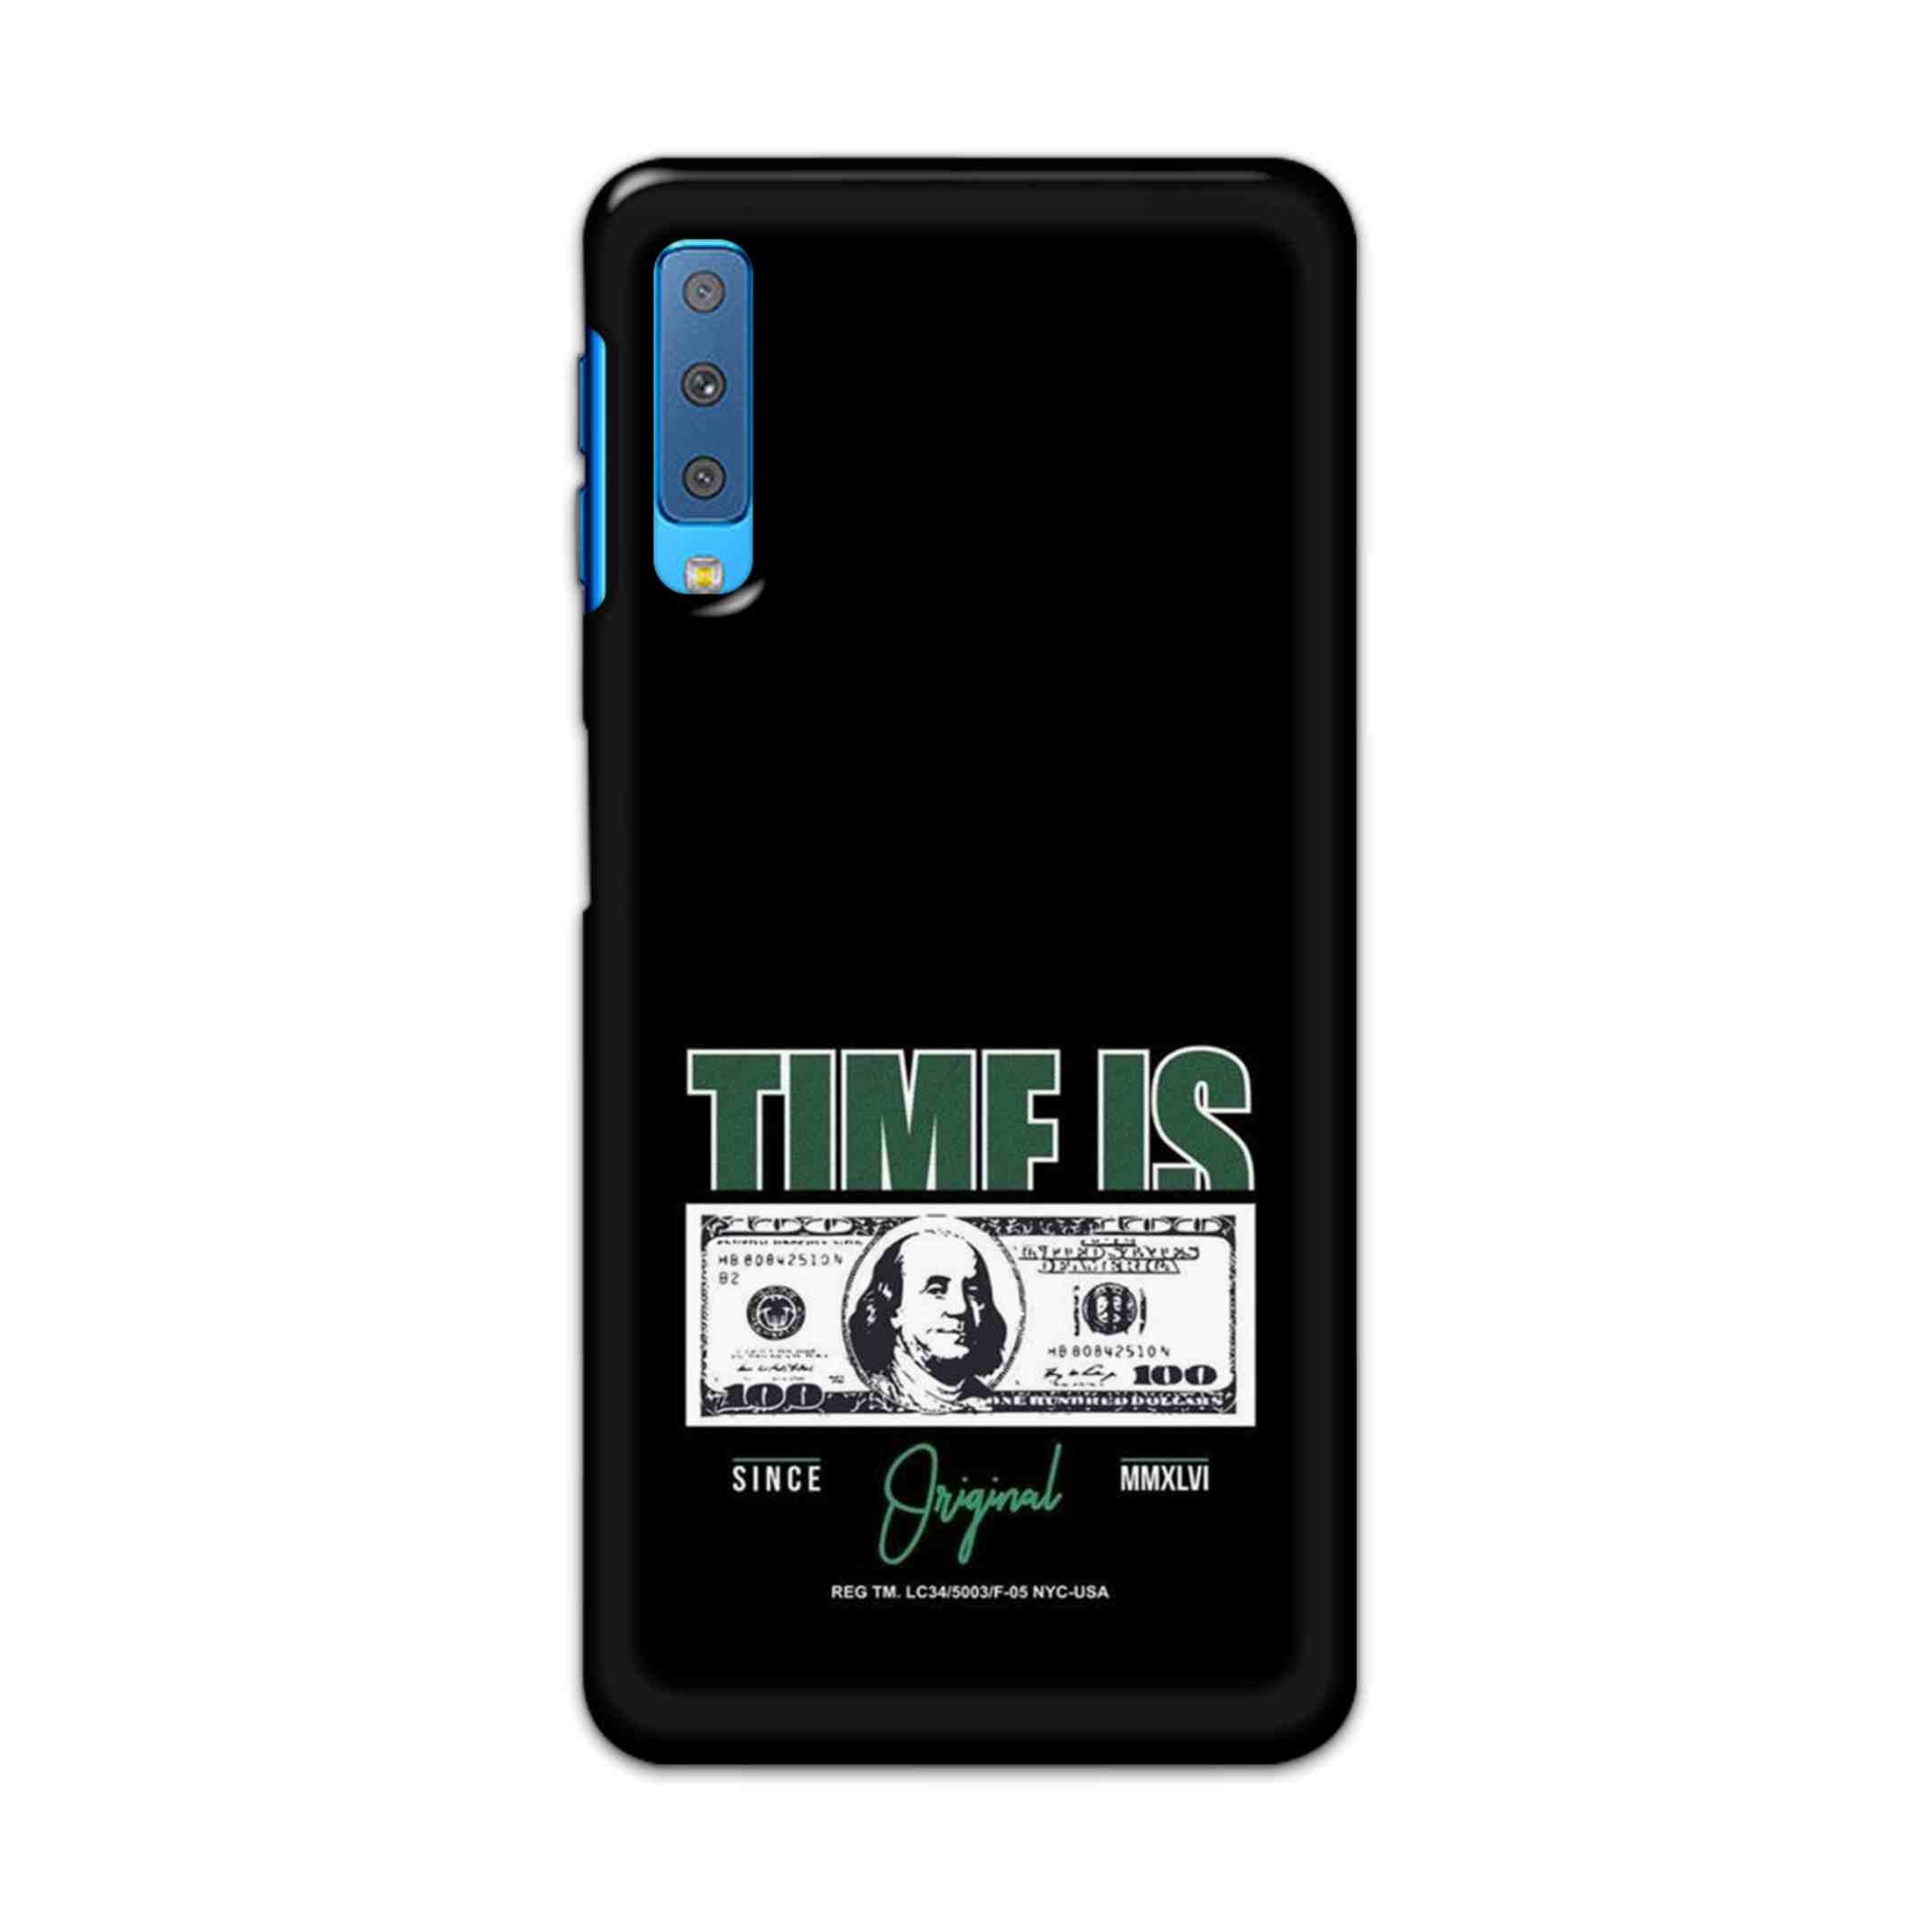 Buy Time Is Money Hard Back Mobile Phone Case Cover For Samsung Galaxy A7 2018 Online